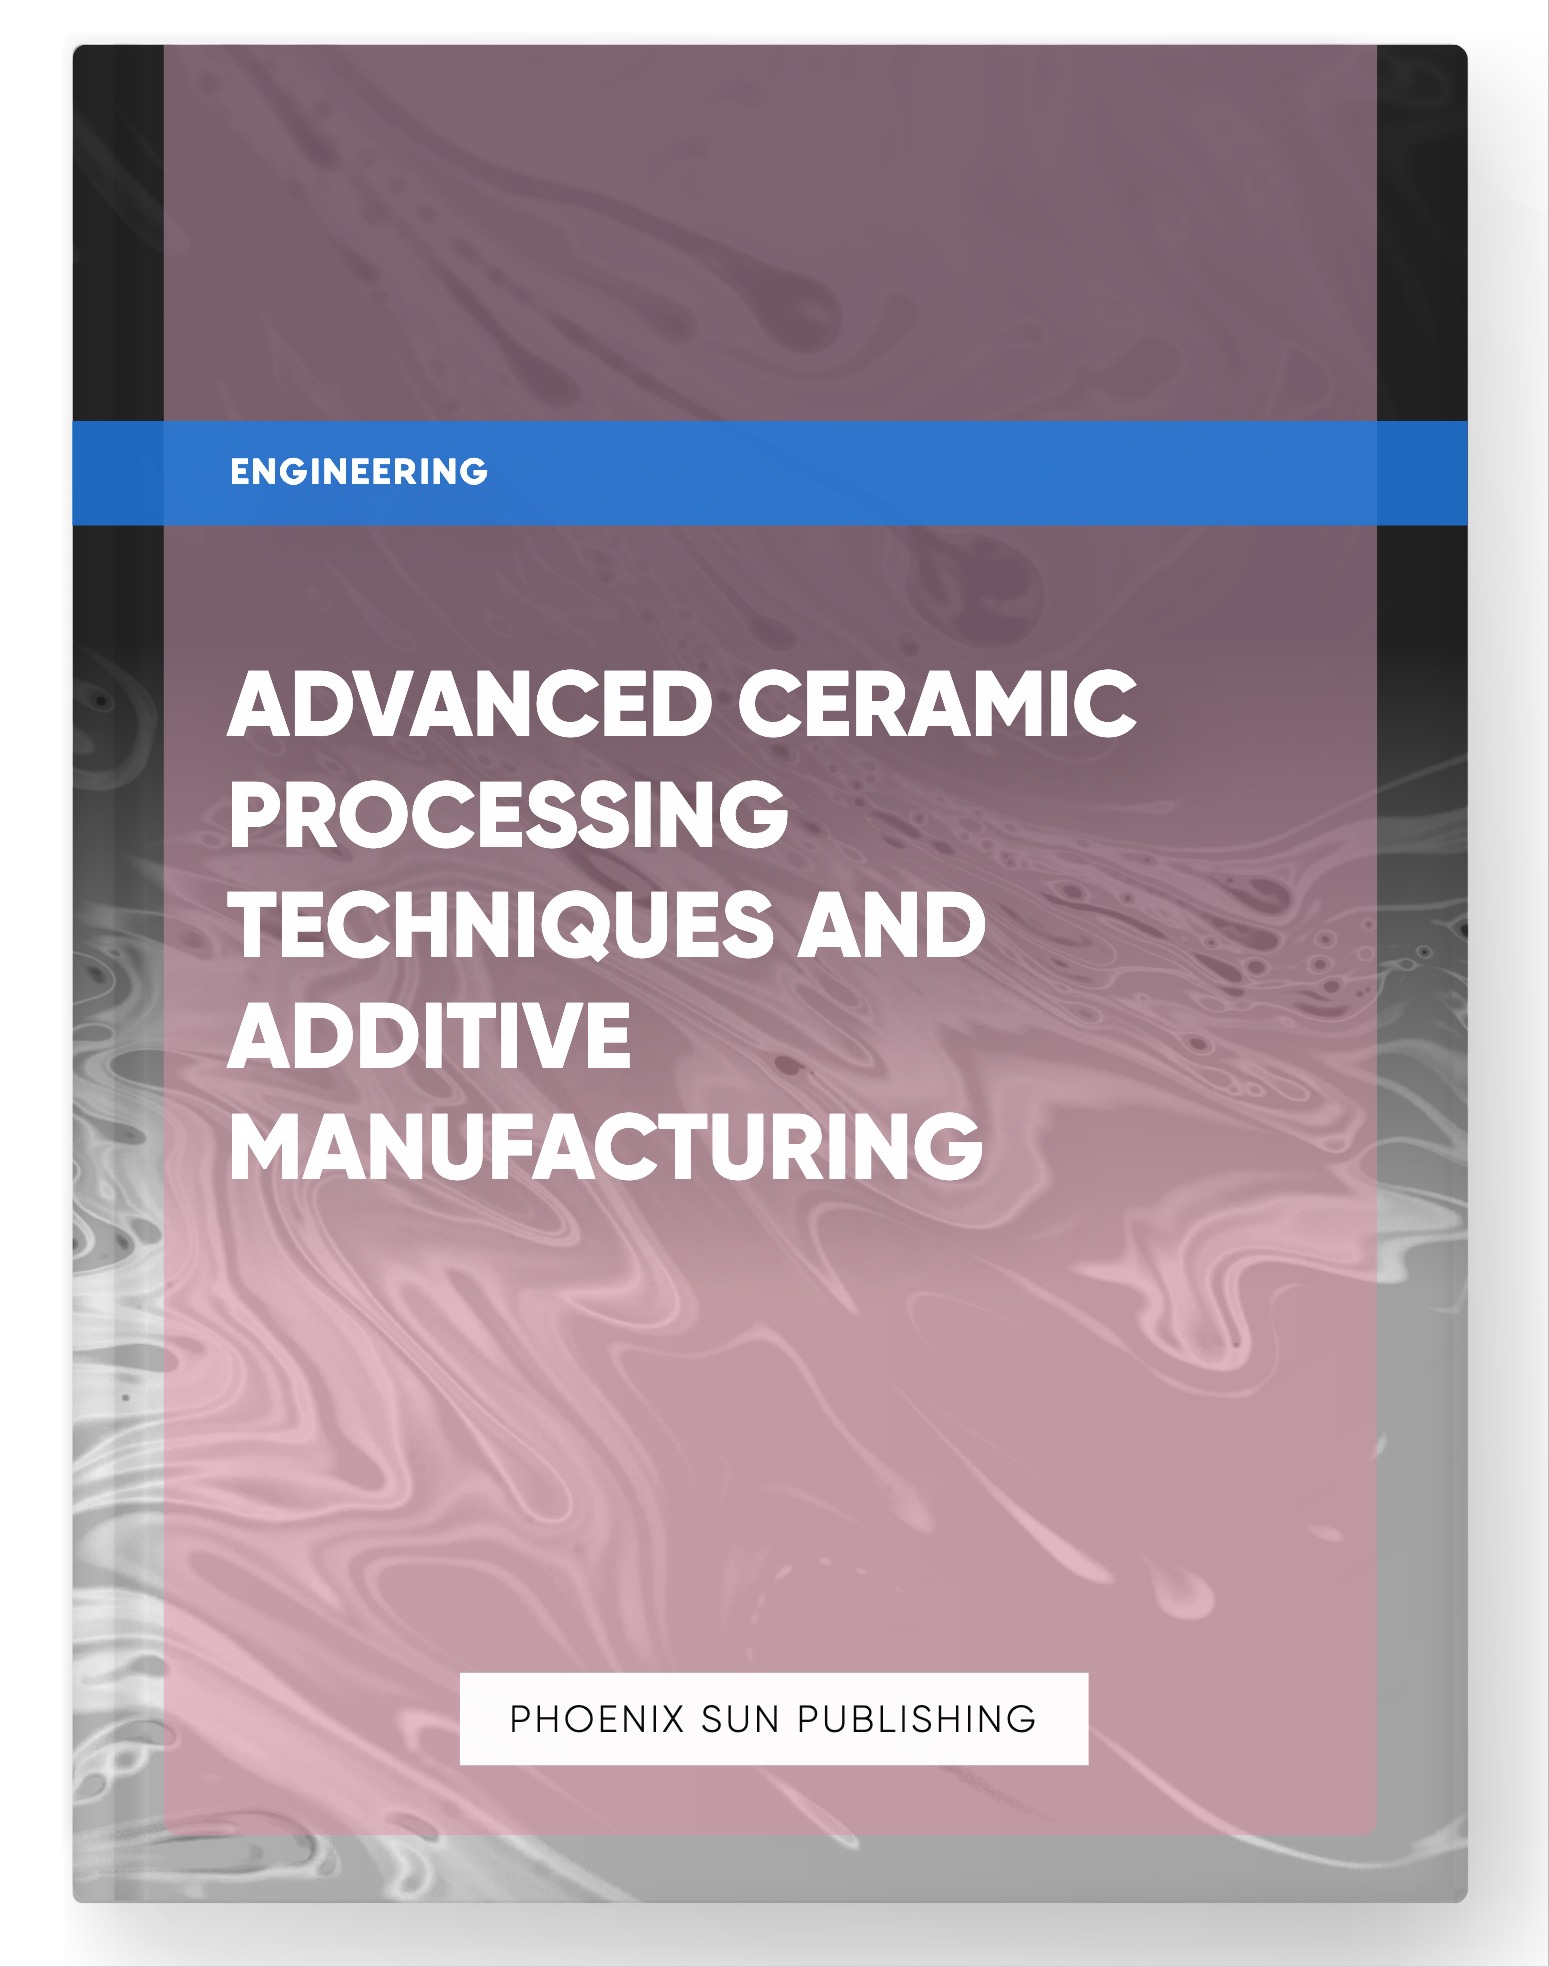 Advanced Ceramic Processing Techniques and Additive Manufacturing